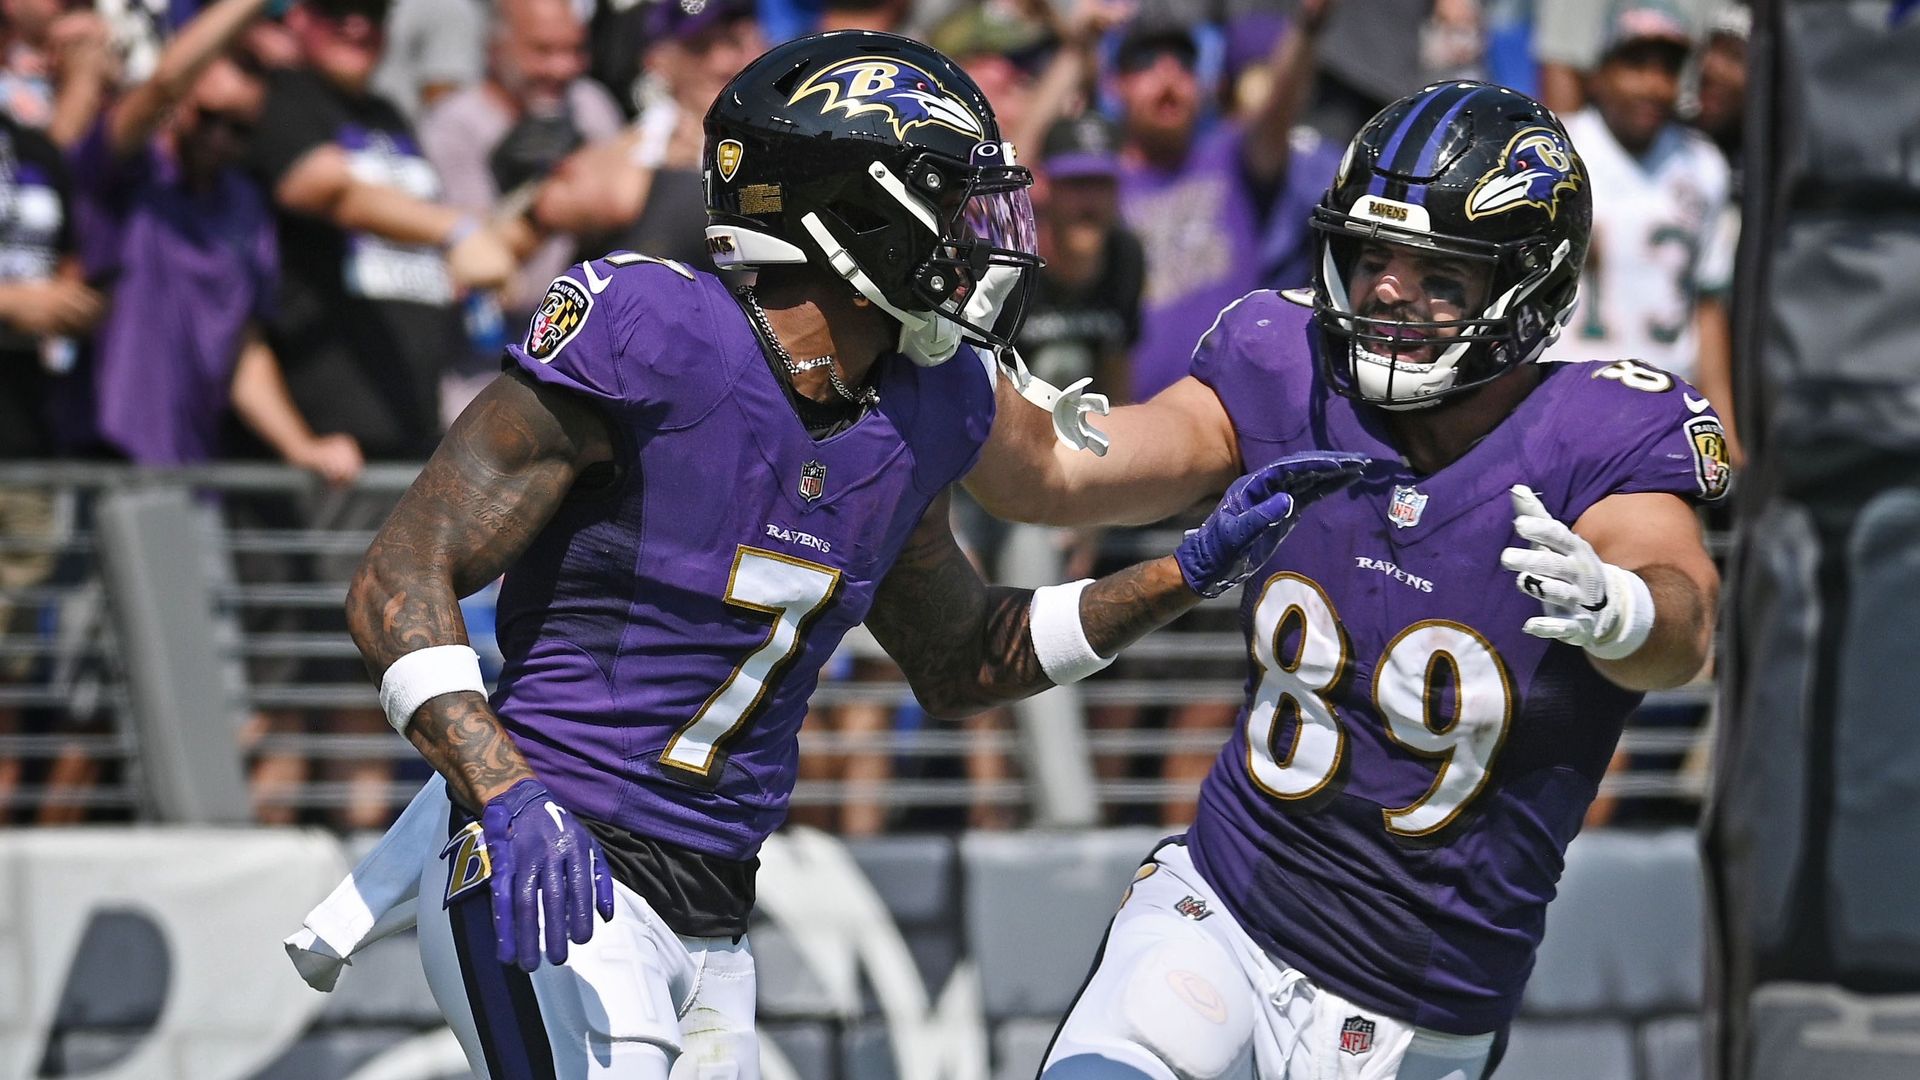 Ravens celebrate a touchdown against the Dolphins.